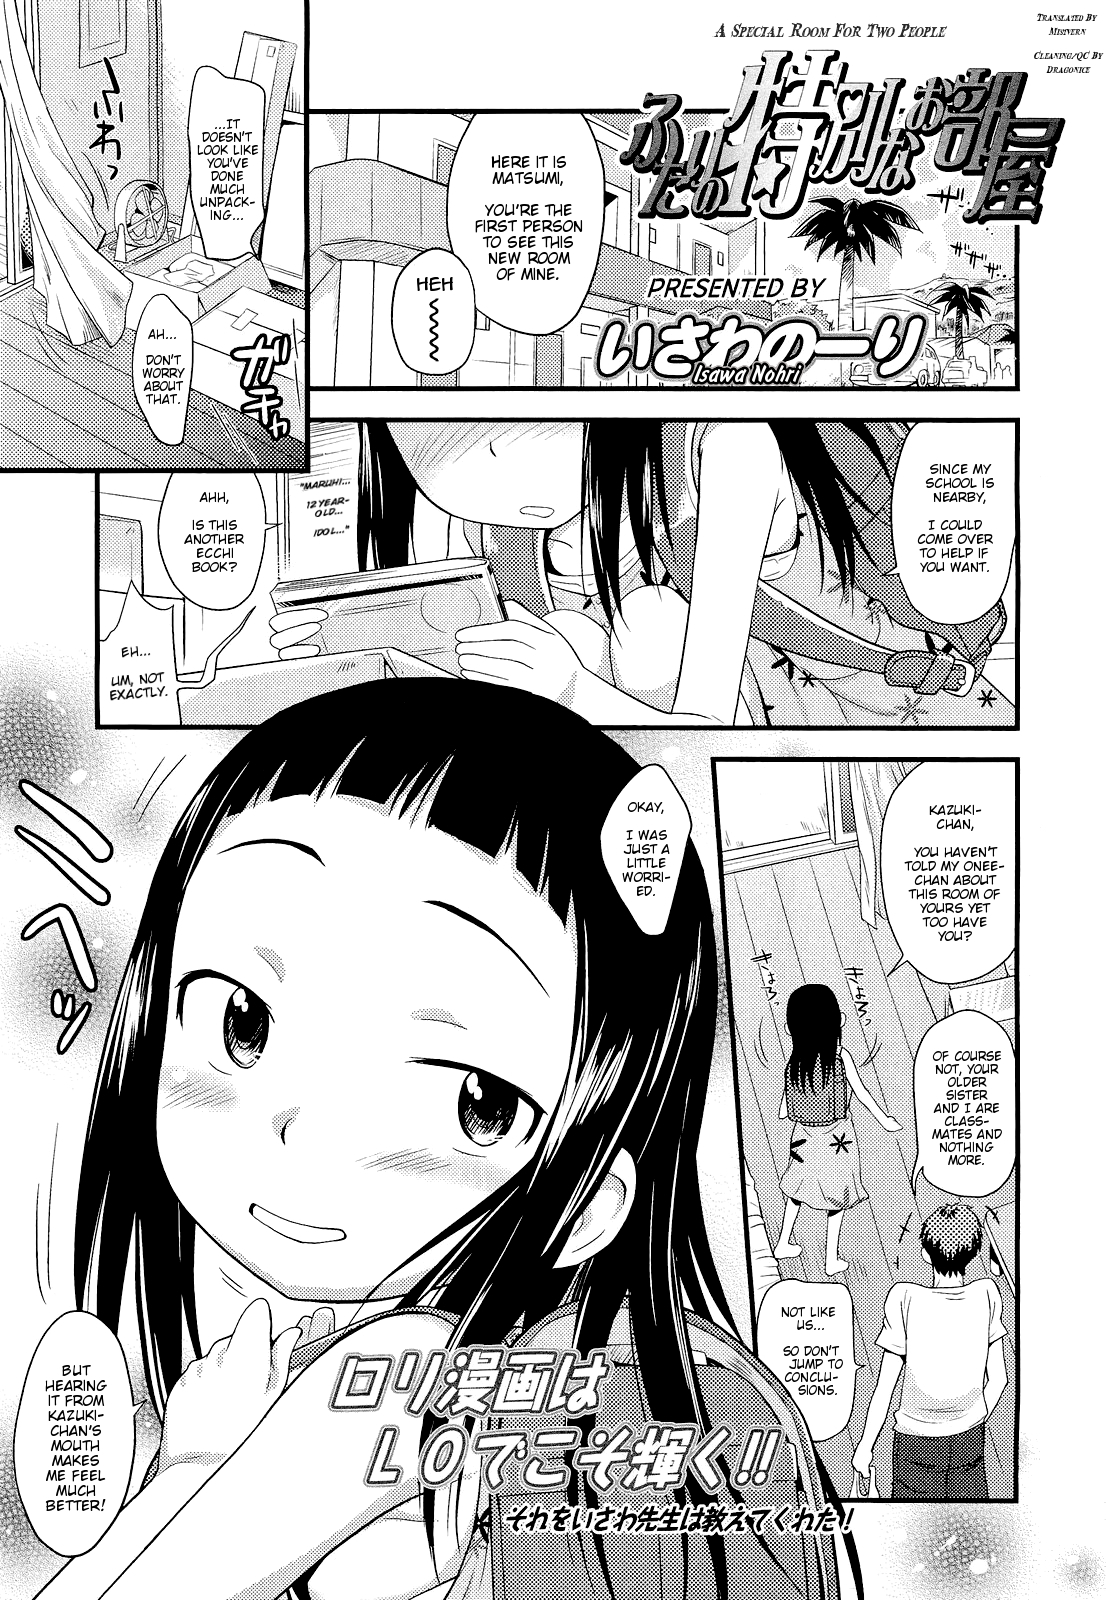 [Nohri Isawa] Futari no Tokubetsu nao Heya (A Special Room for Two people) [ENG] [Mistvern] page 1 full